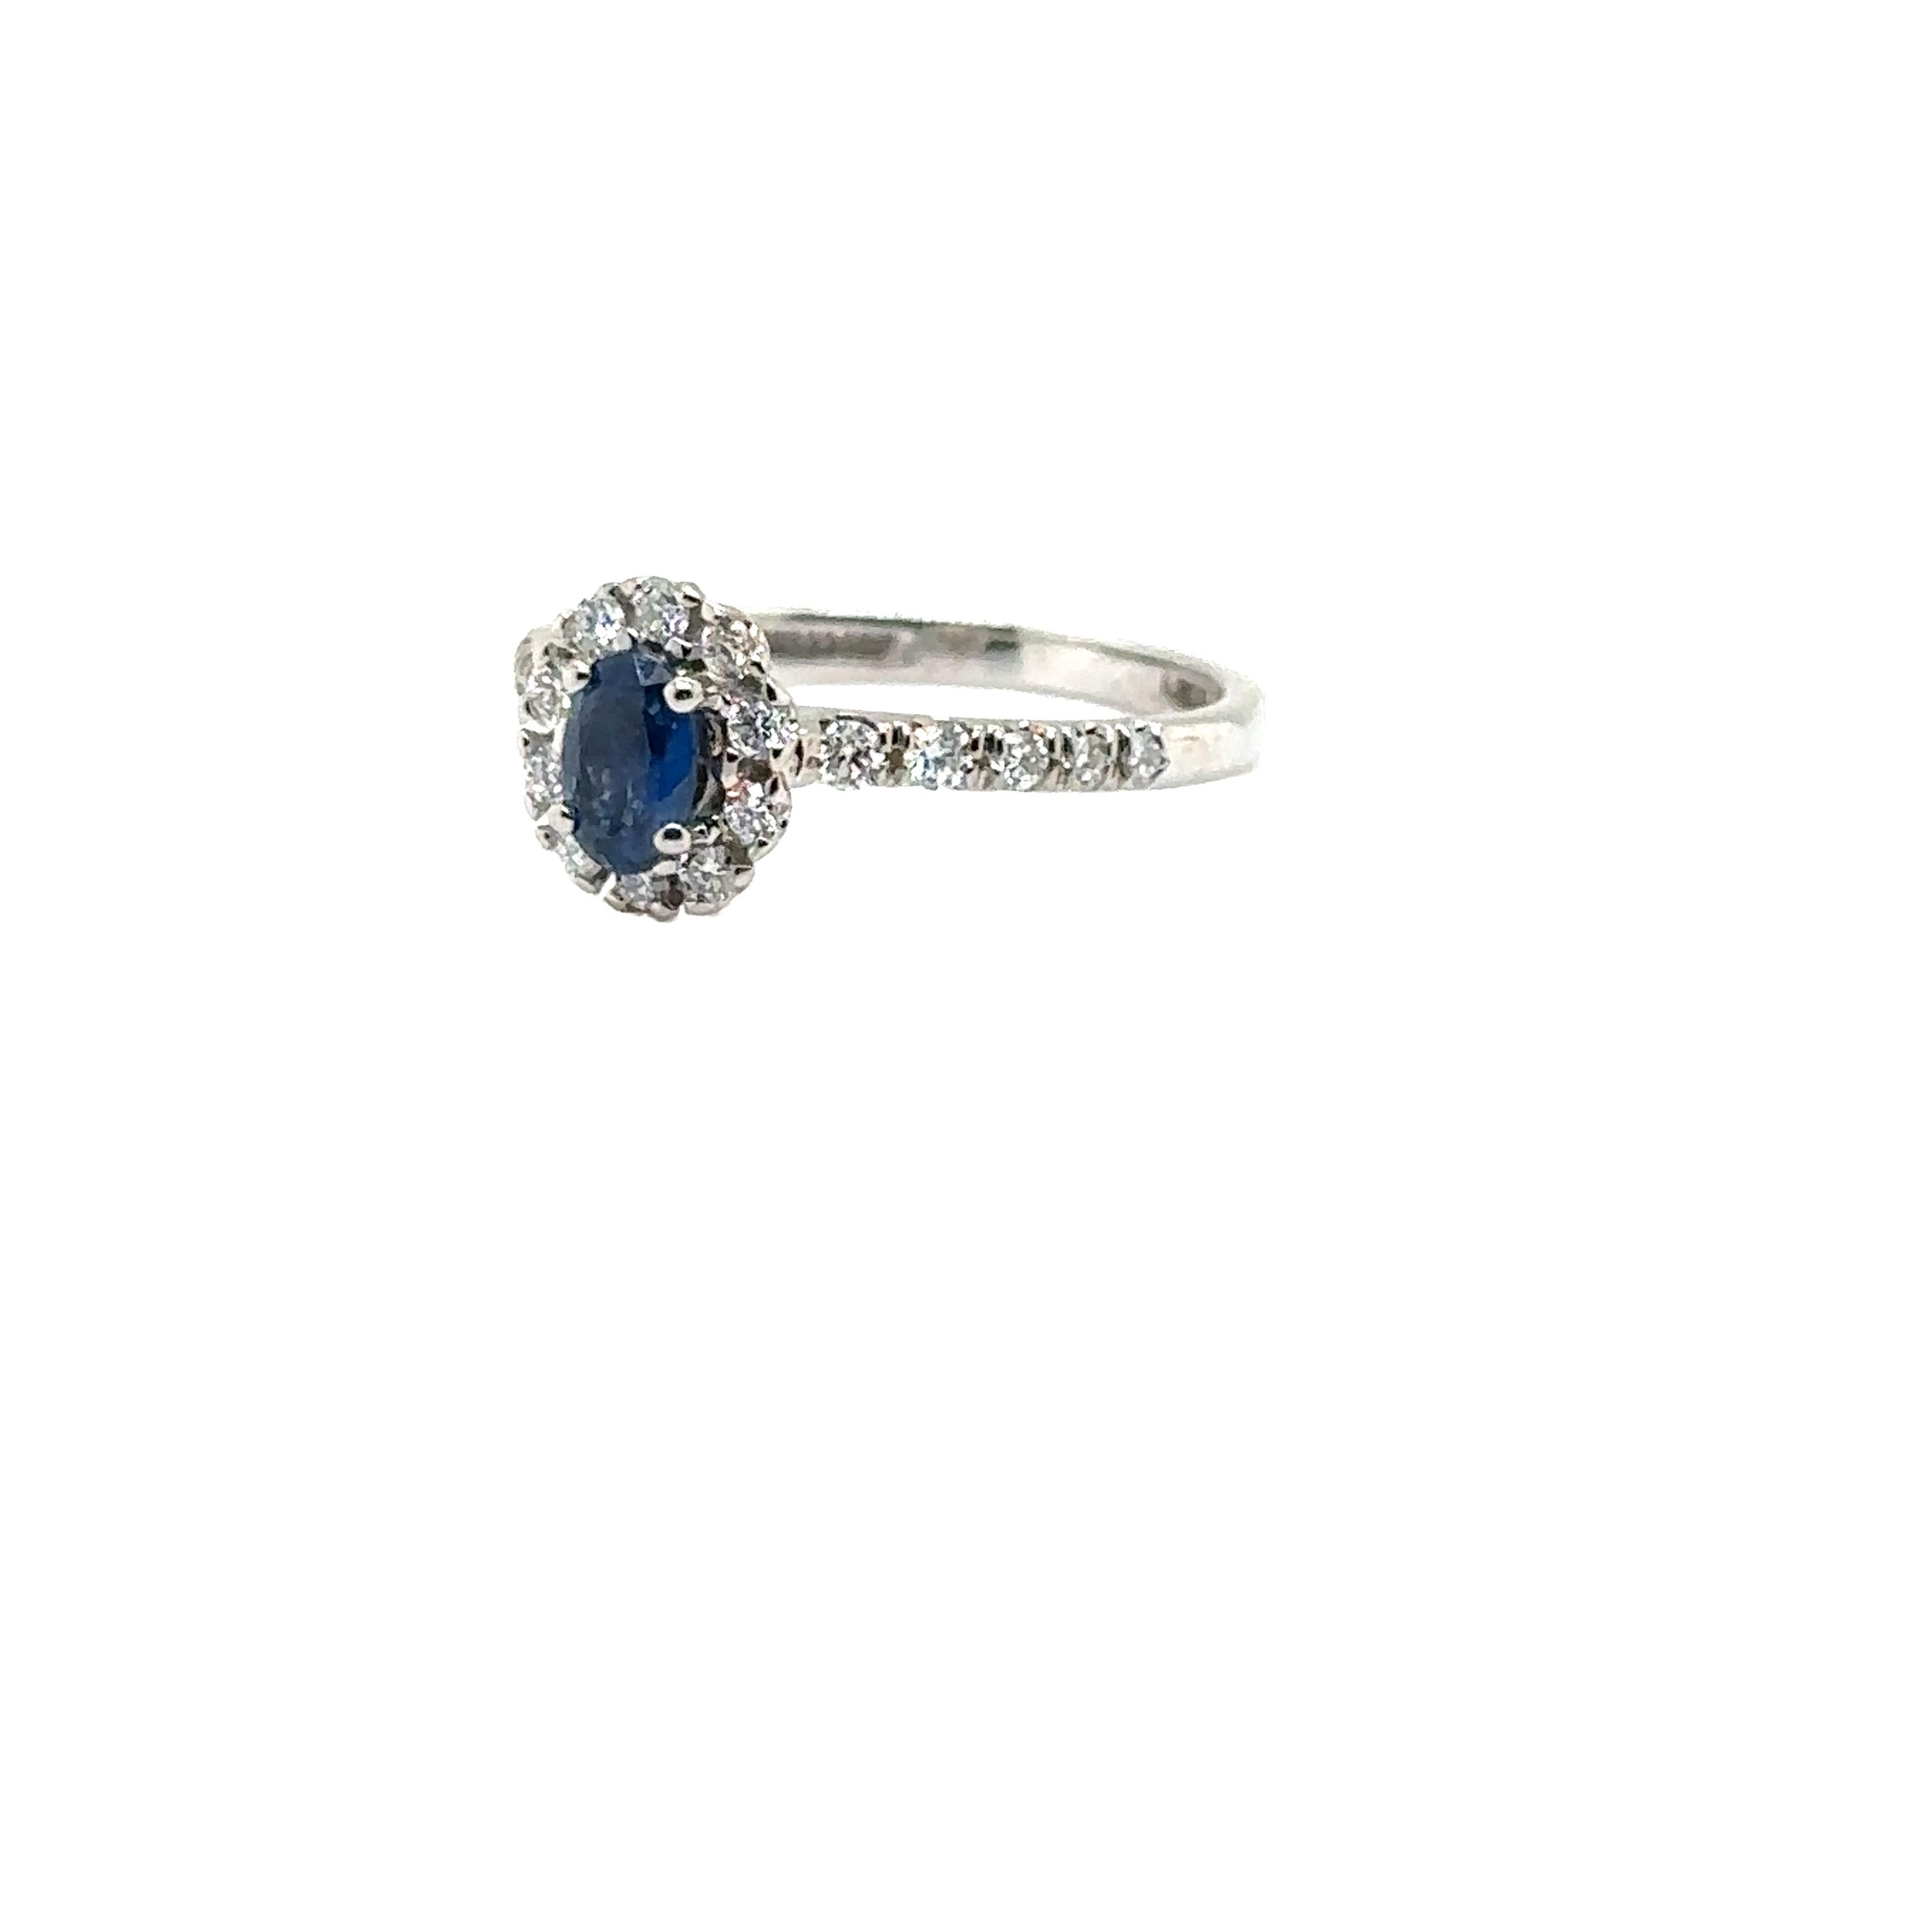 14K WHITE GOLD OVAL SAPPHIRE RING with DIAMONDS
Metal: 14K WHITE GOLD
Diamond Info: GH SI DIAMONDS 0.33CT
Stone Info: 6X4 OVAL SAPPHIRE 0.52CT
Total Dia Weight: 0.33 cwt.
Total Stone Weight: 0.52 cwt.
Item Weight:  2.20 gm
Ring Size: 8